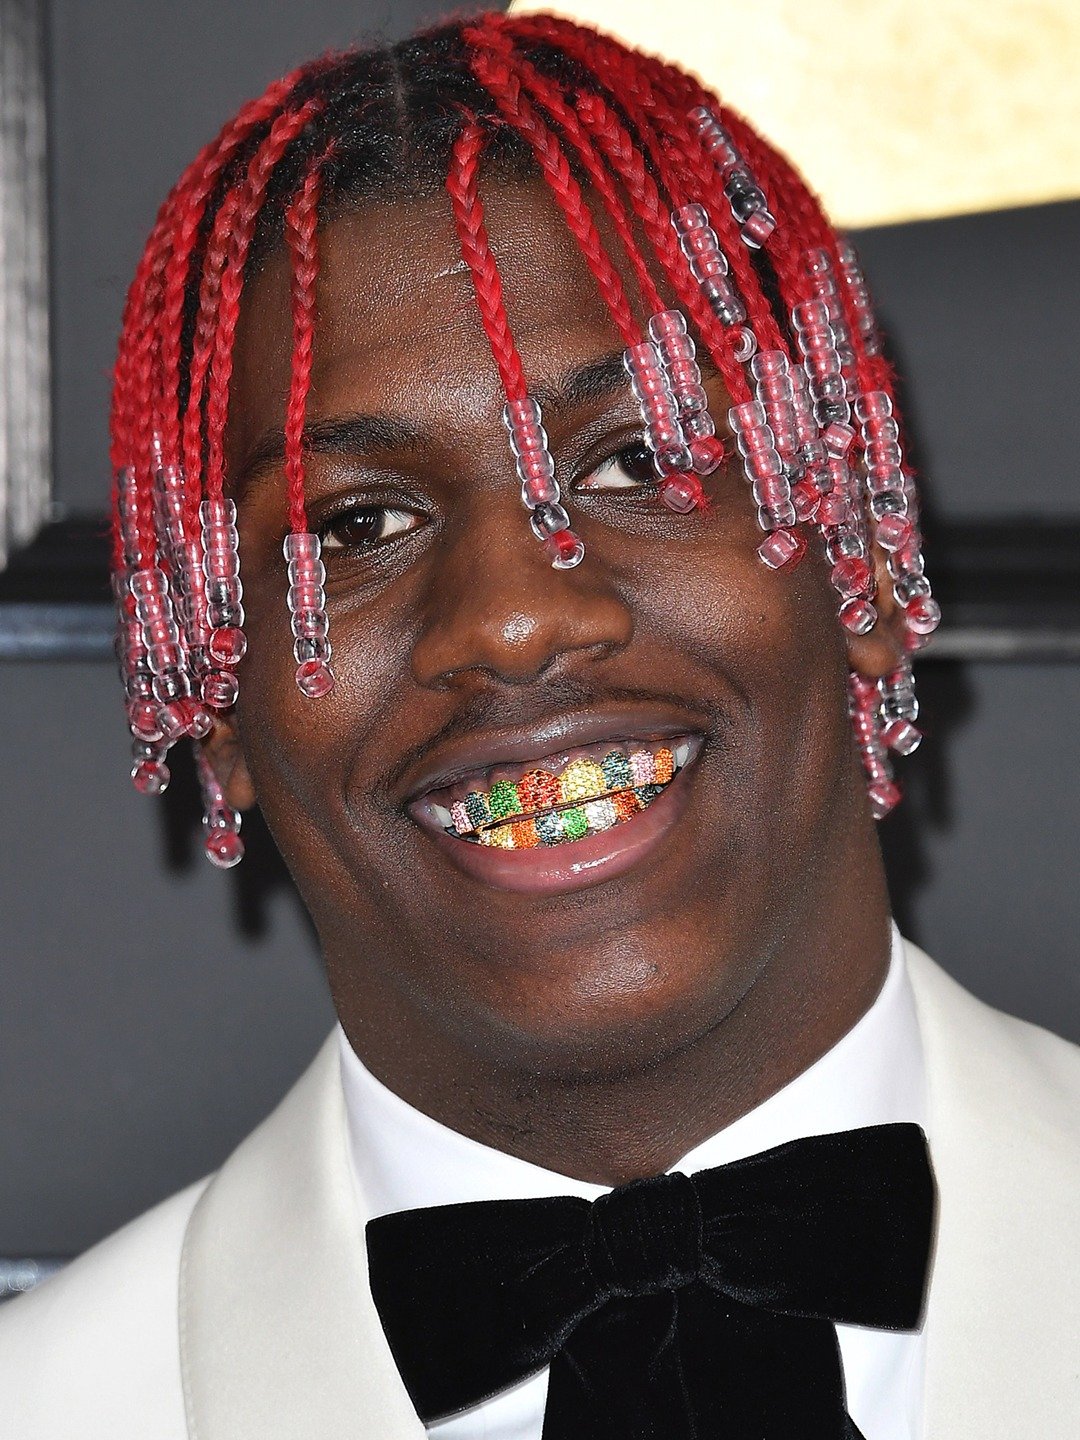 young lil yachty